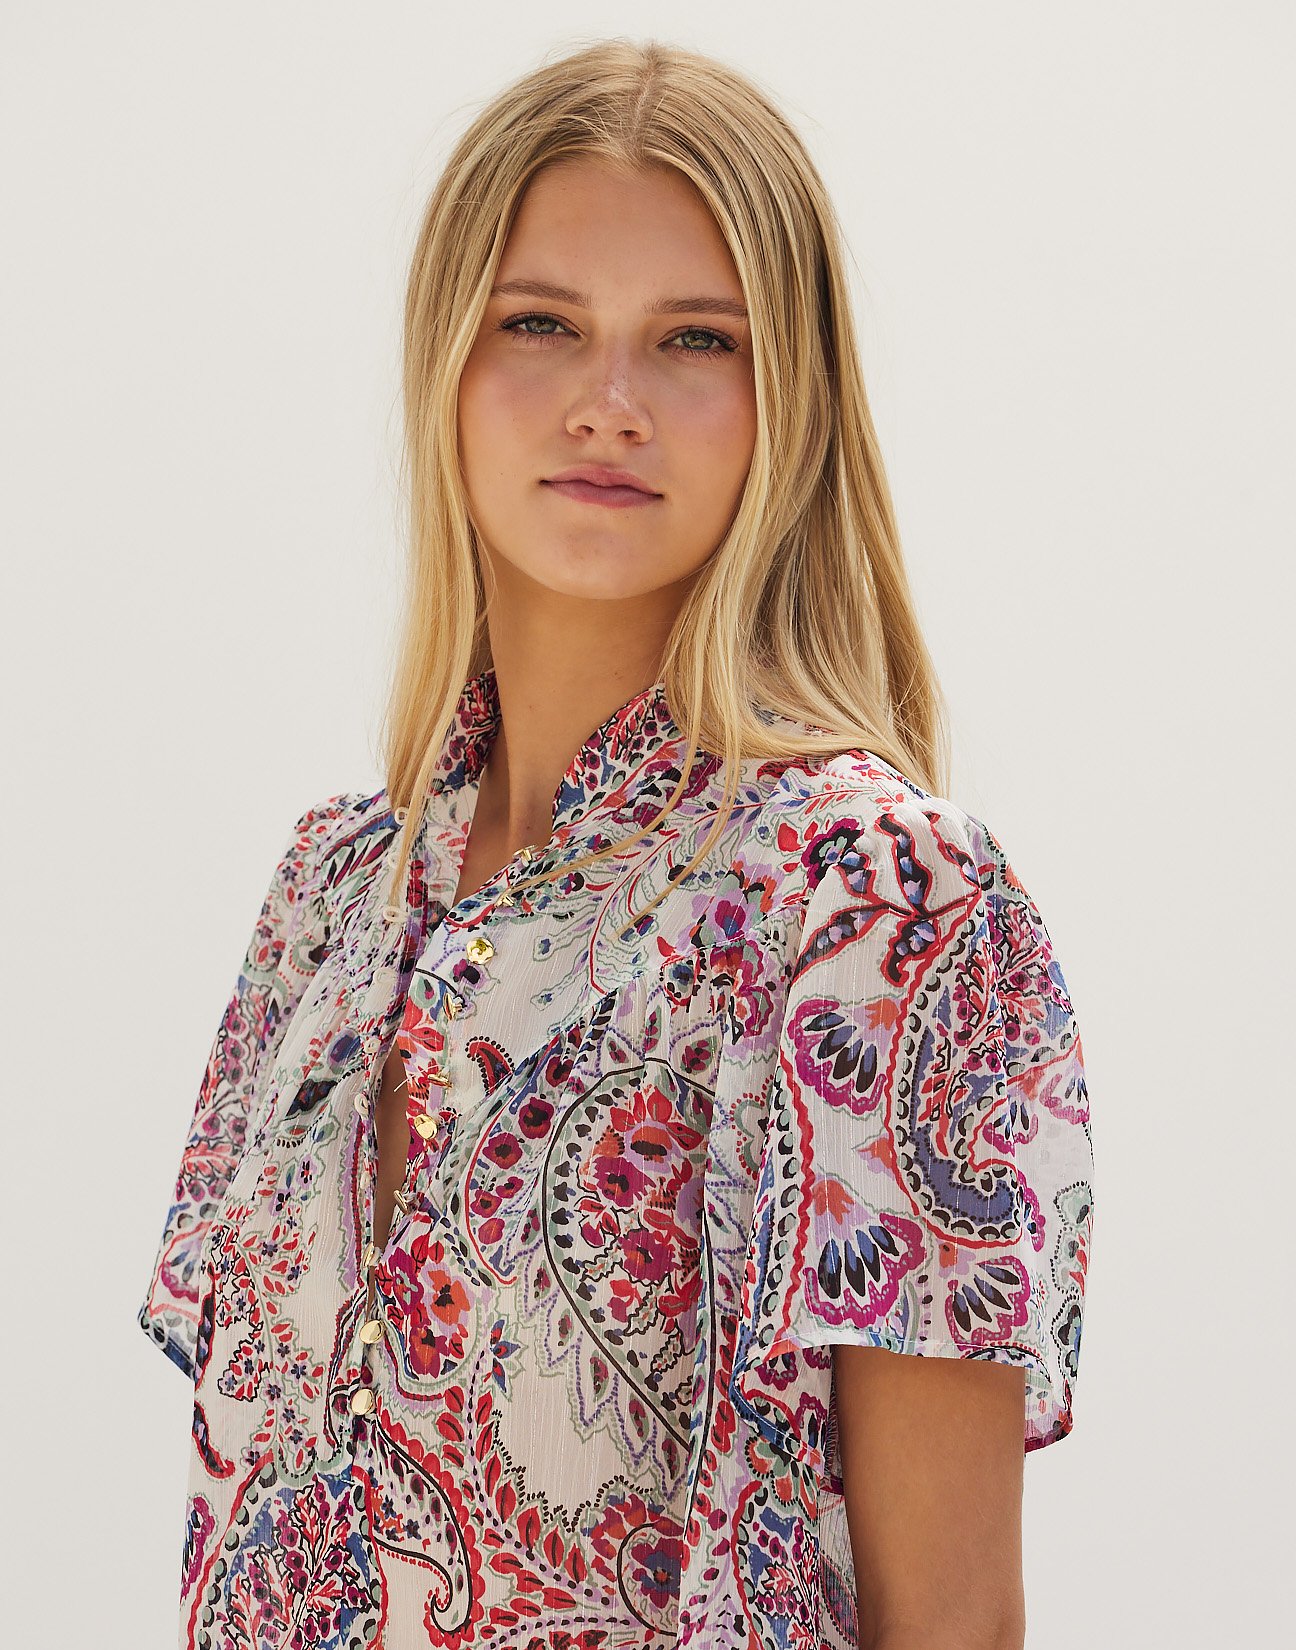 Printed top with buttons